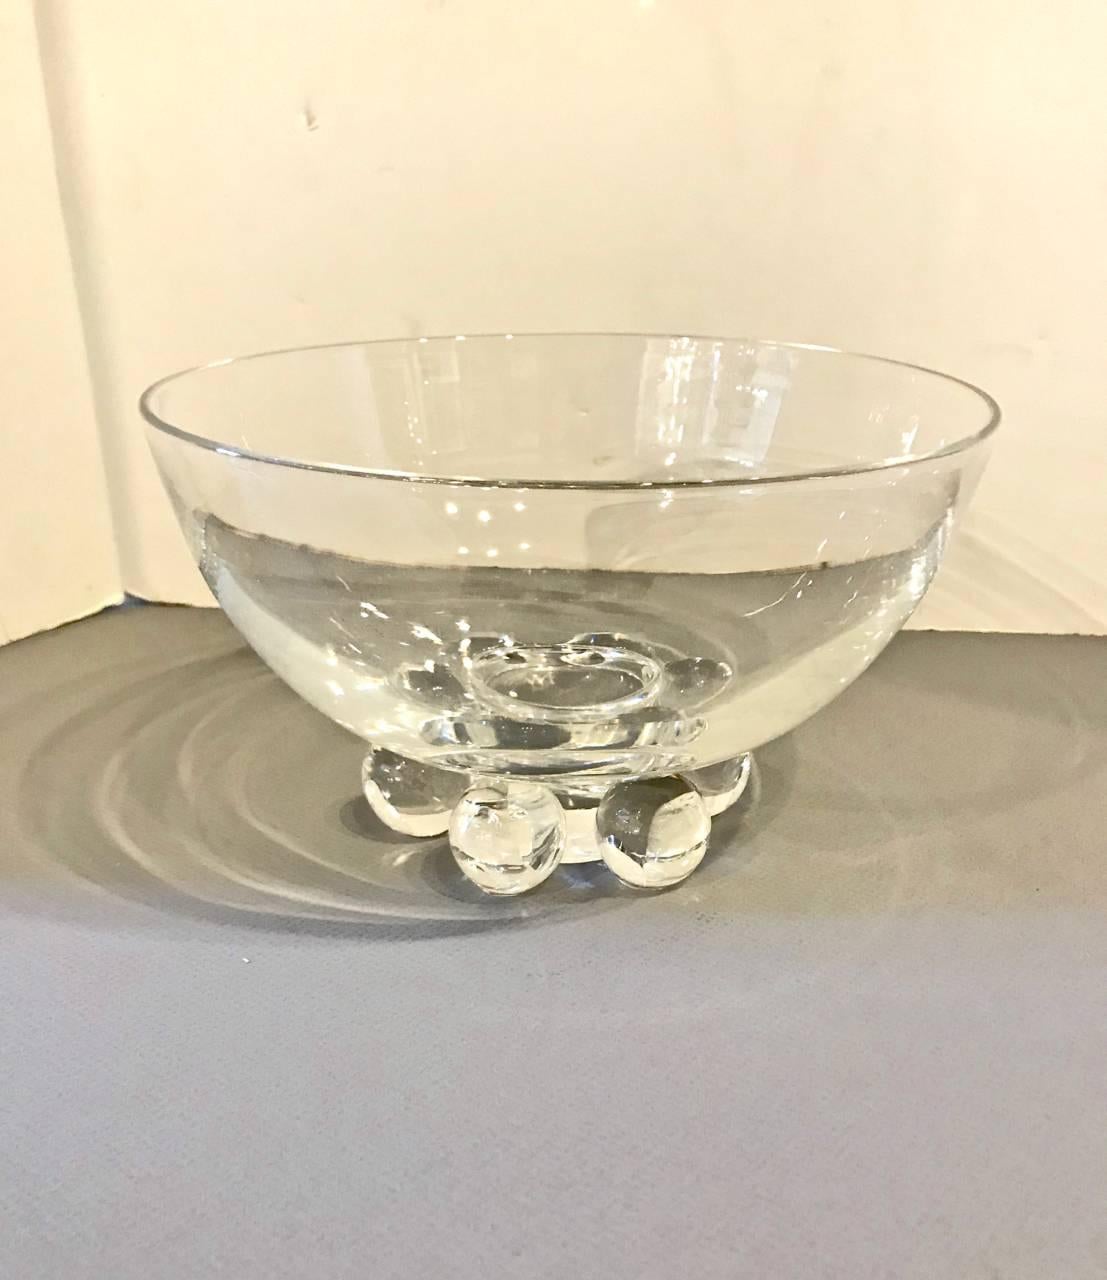 This is a great signed Steuben bowl that is raised on six glass balls and dates to the mid-20th century. The bowl is in excellent condition with the signature Steuben brilliance. The top diameter is 9 inches; the bottom diameter is 5 inches.